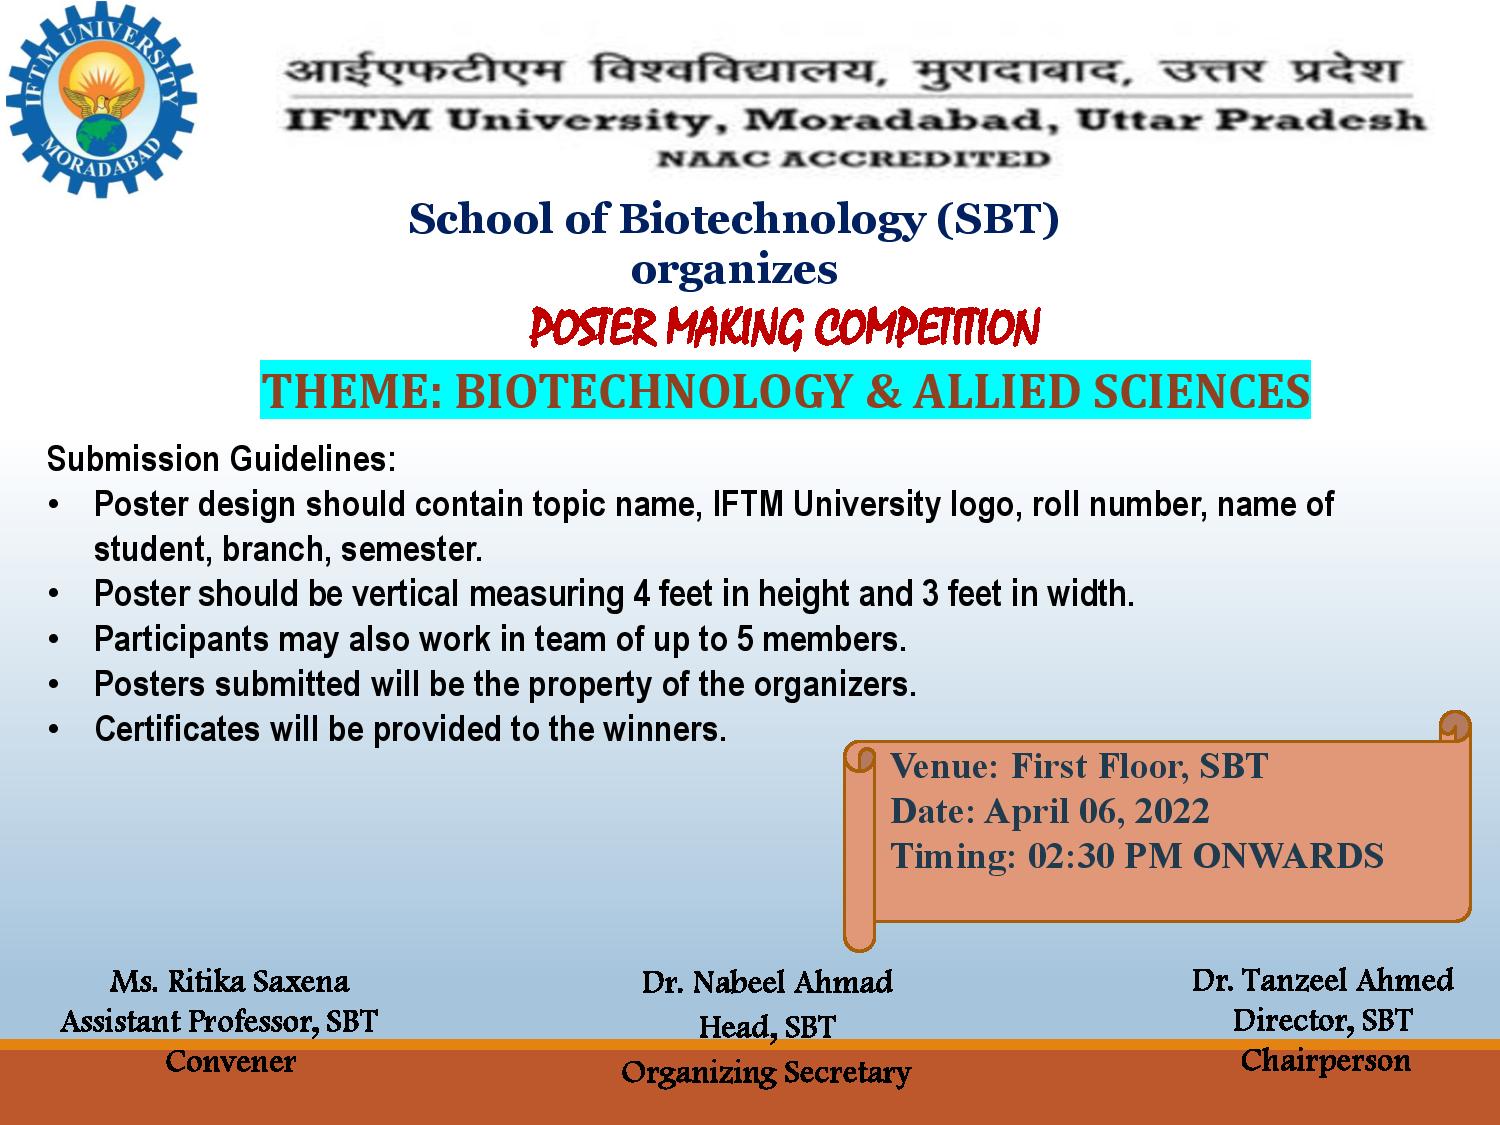 Poster making Competition on Biotechnology & Allied Sciences